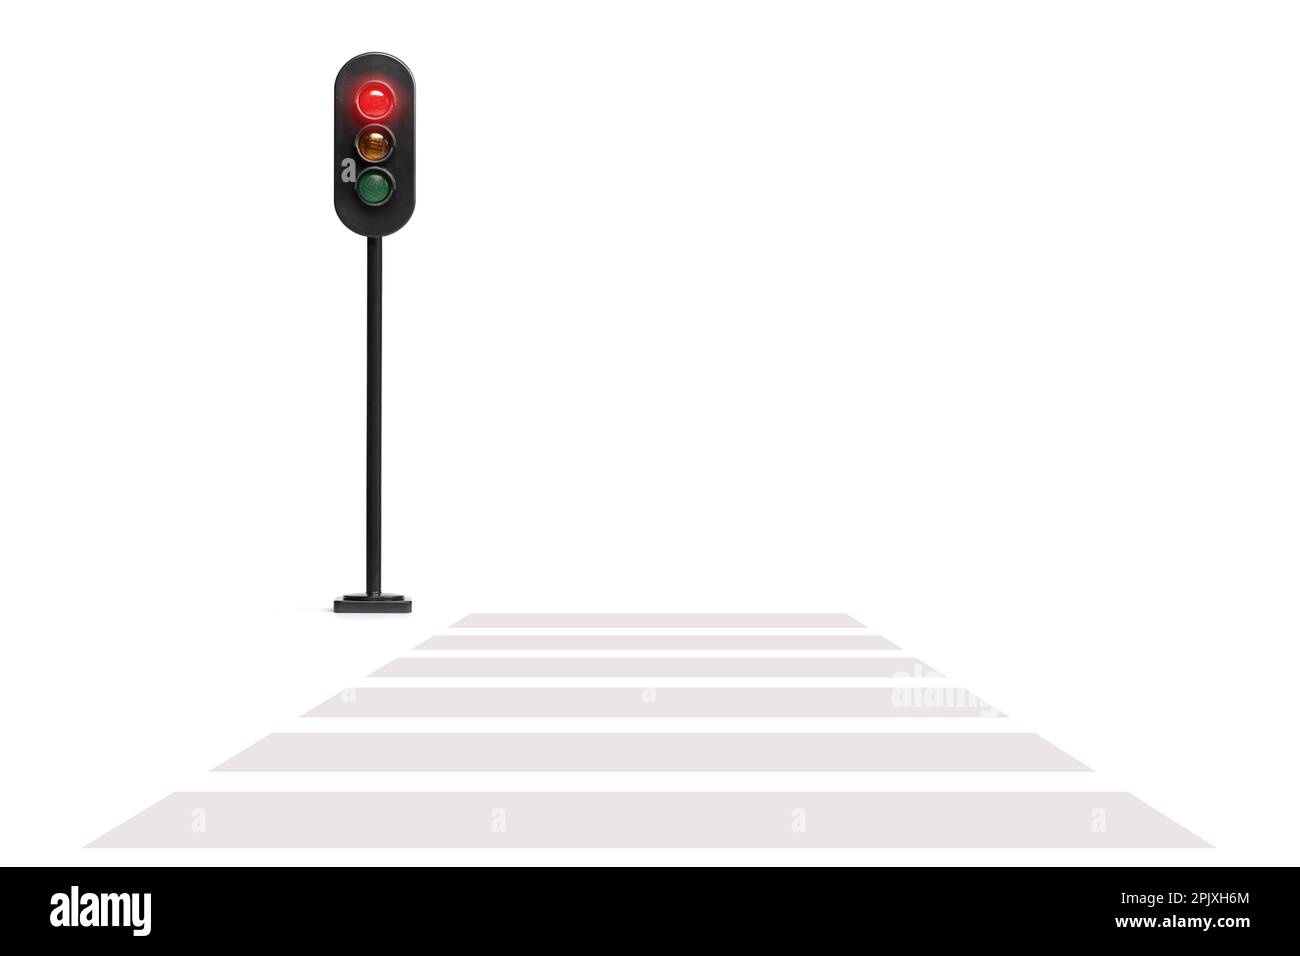 Traffic light near a pedestrian crossing with red light flashing on isolated on white background Stock Photo